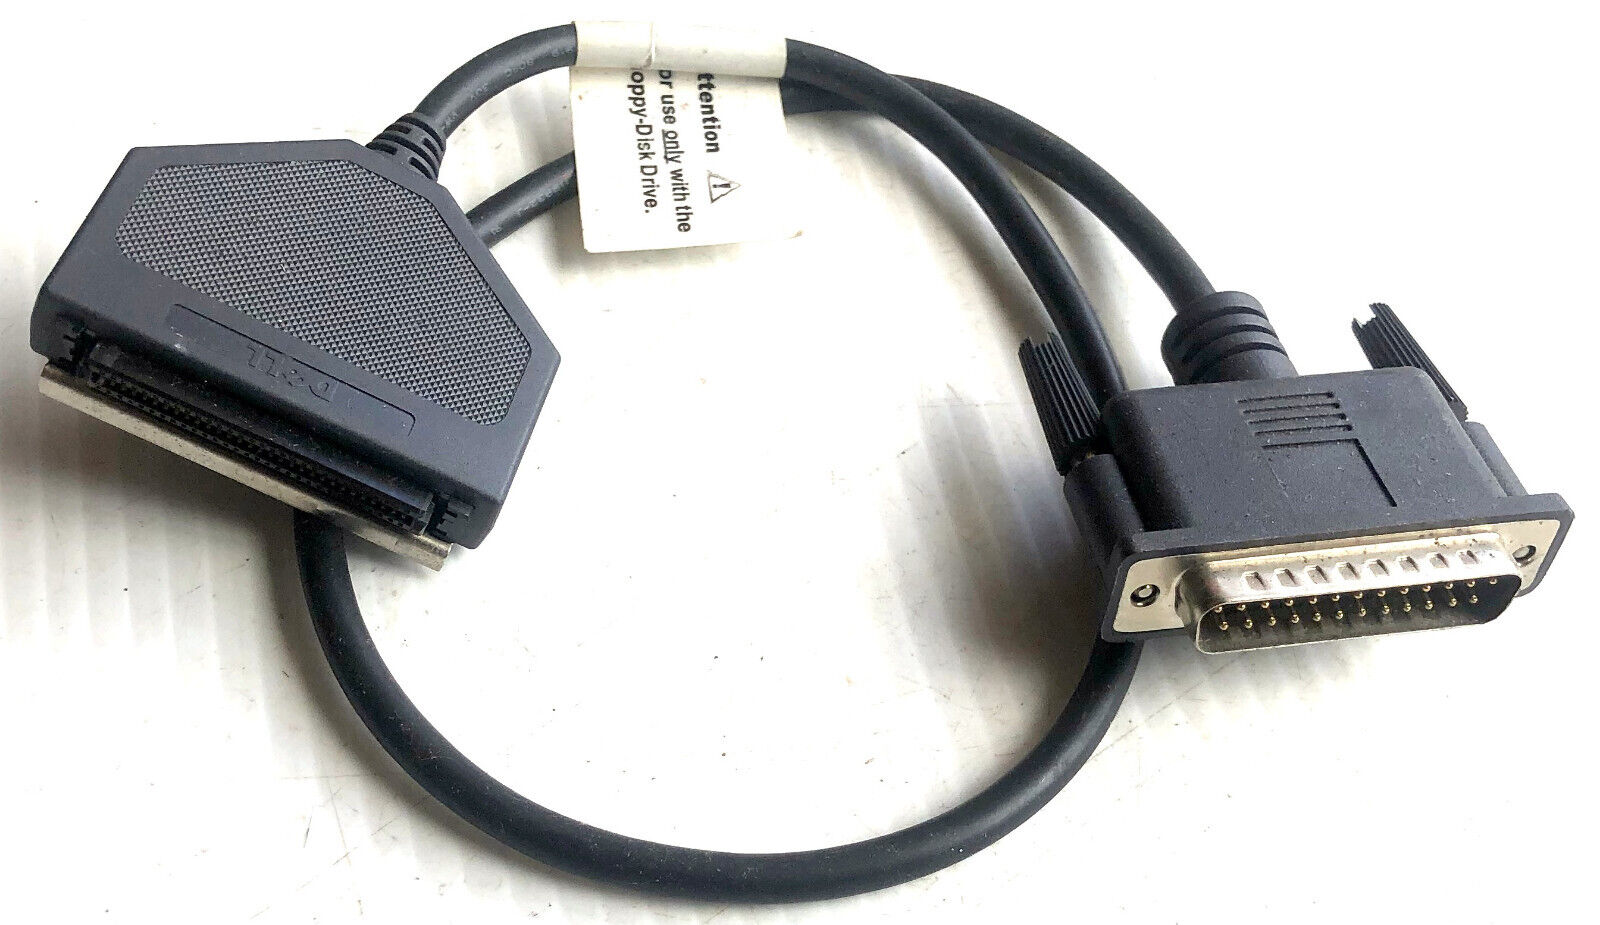 Genuine Dell 53975 External Floppy Disk Drive FDD Cable